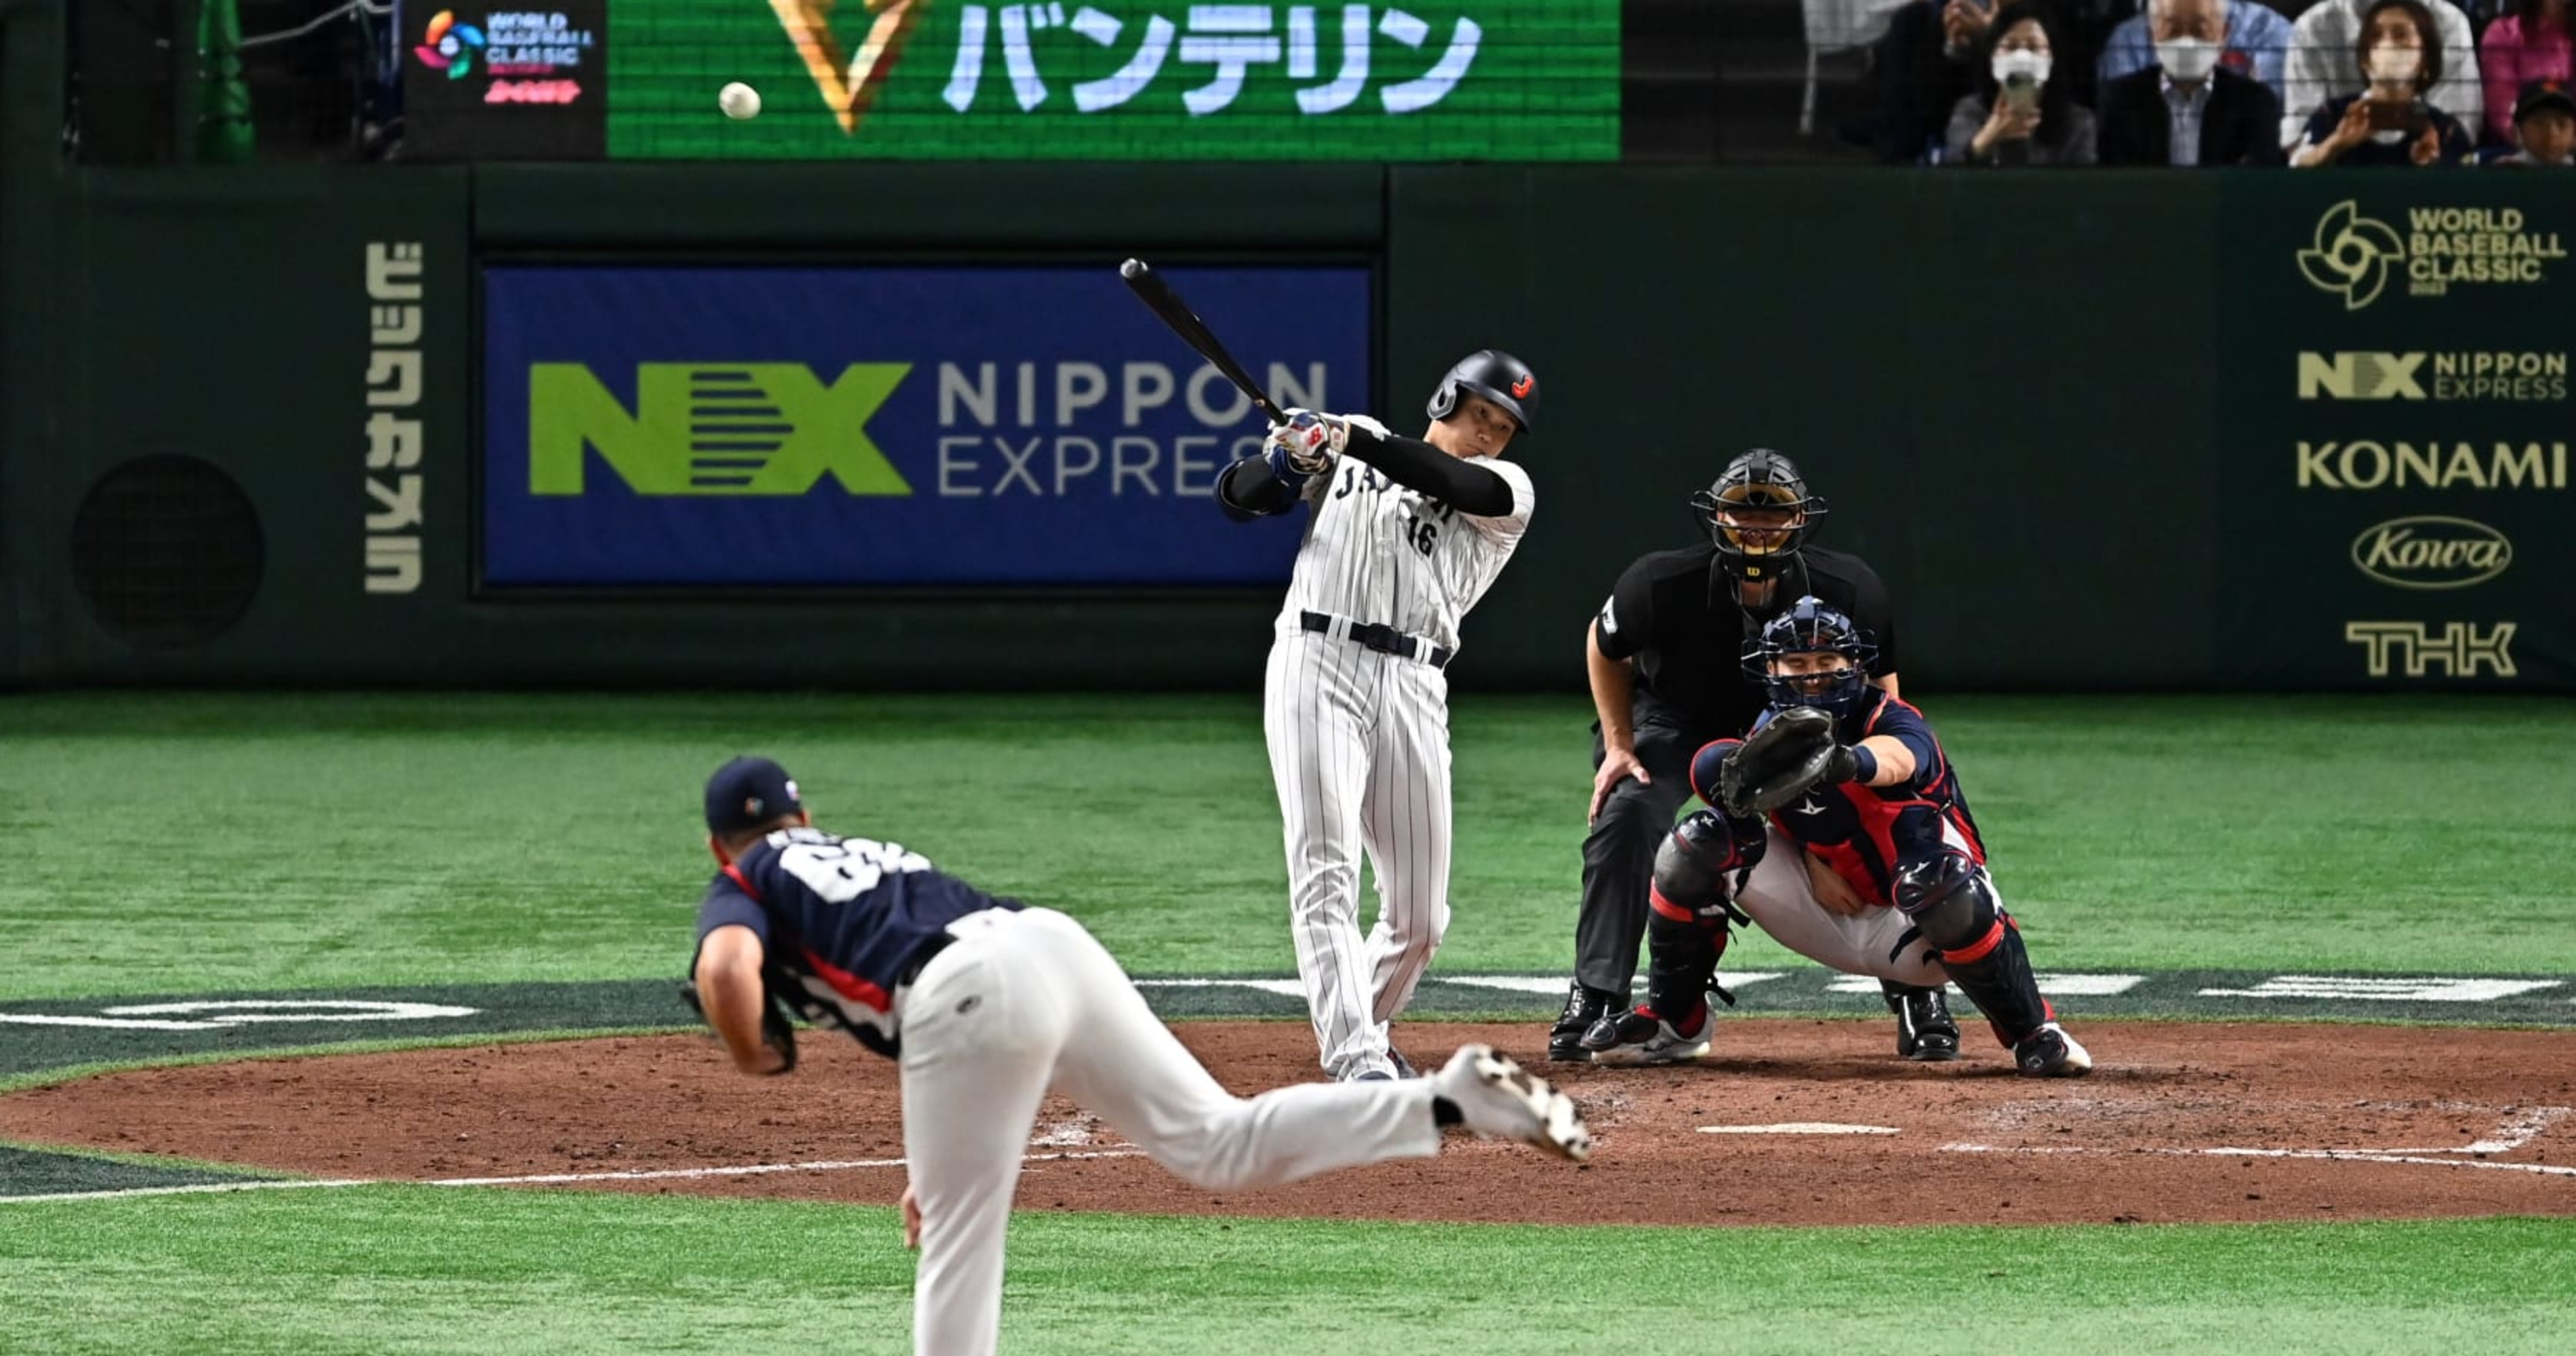 Led by Ohtani, Japan has the talent to win World Baseball Classic